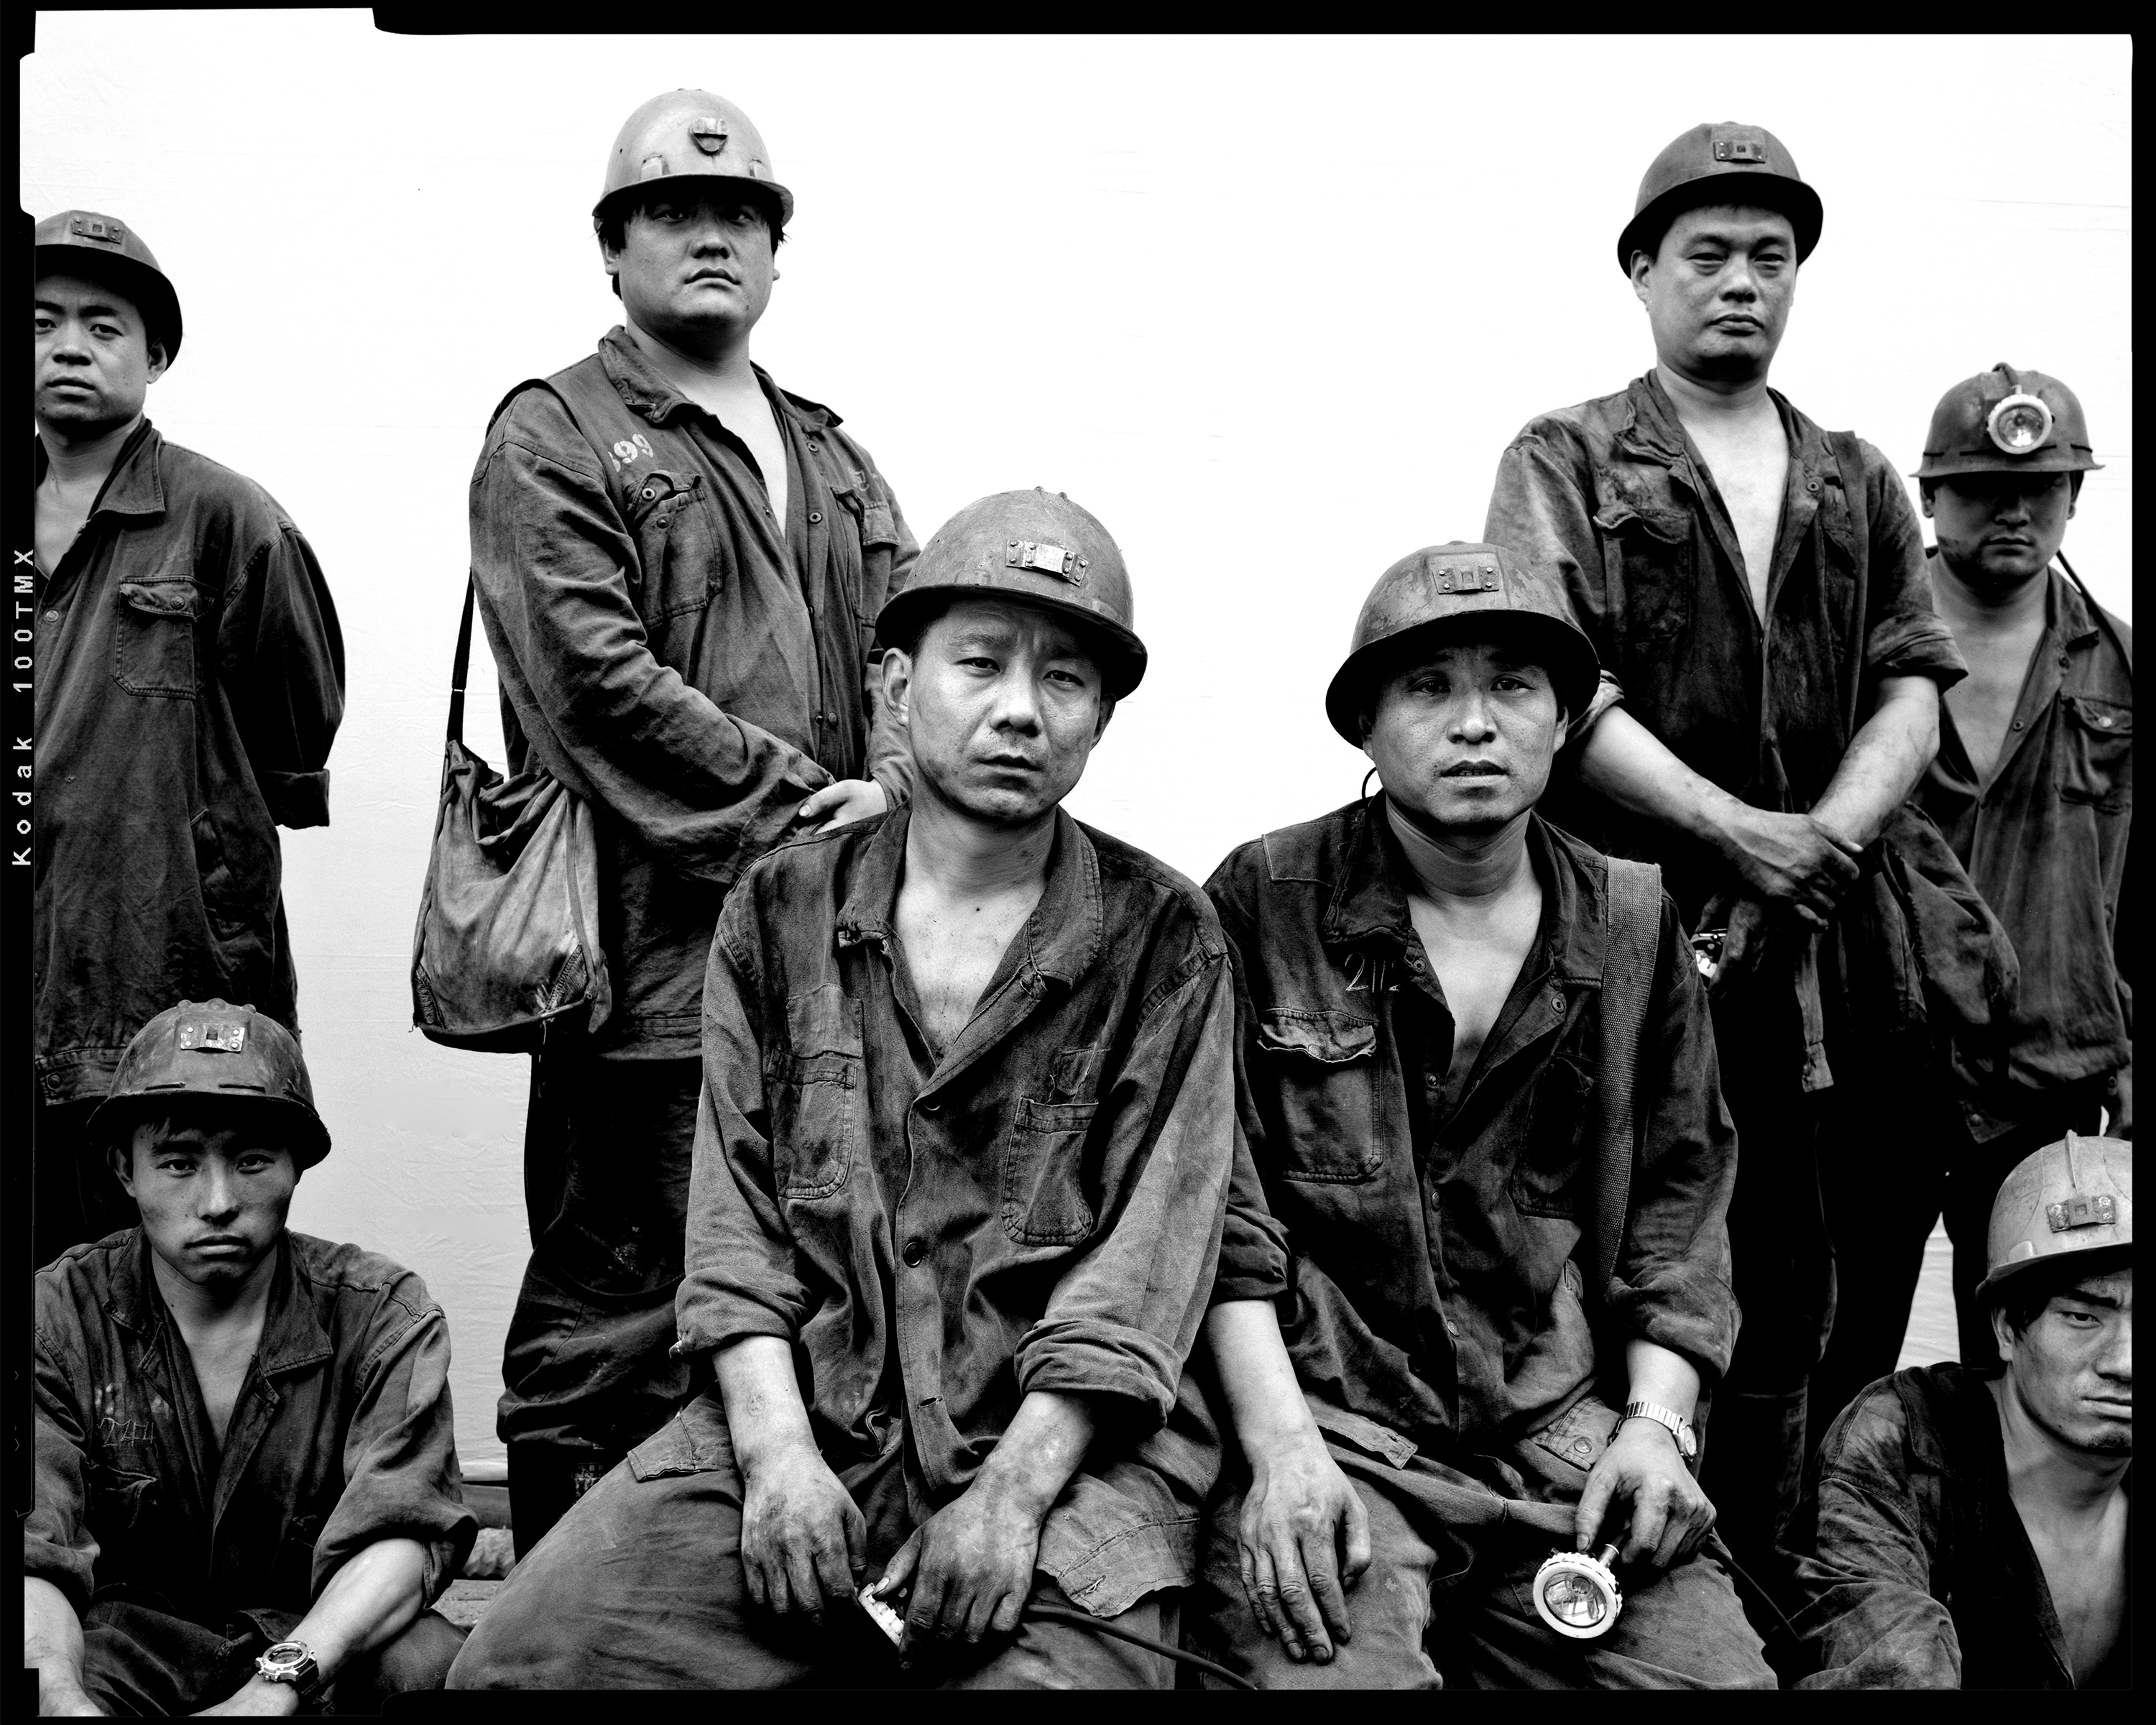 A group of coal miners